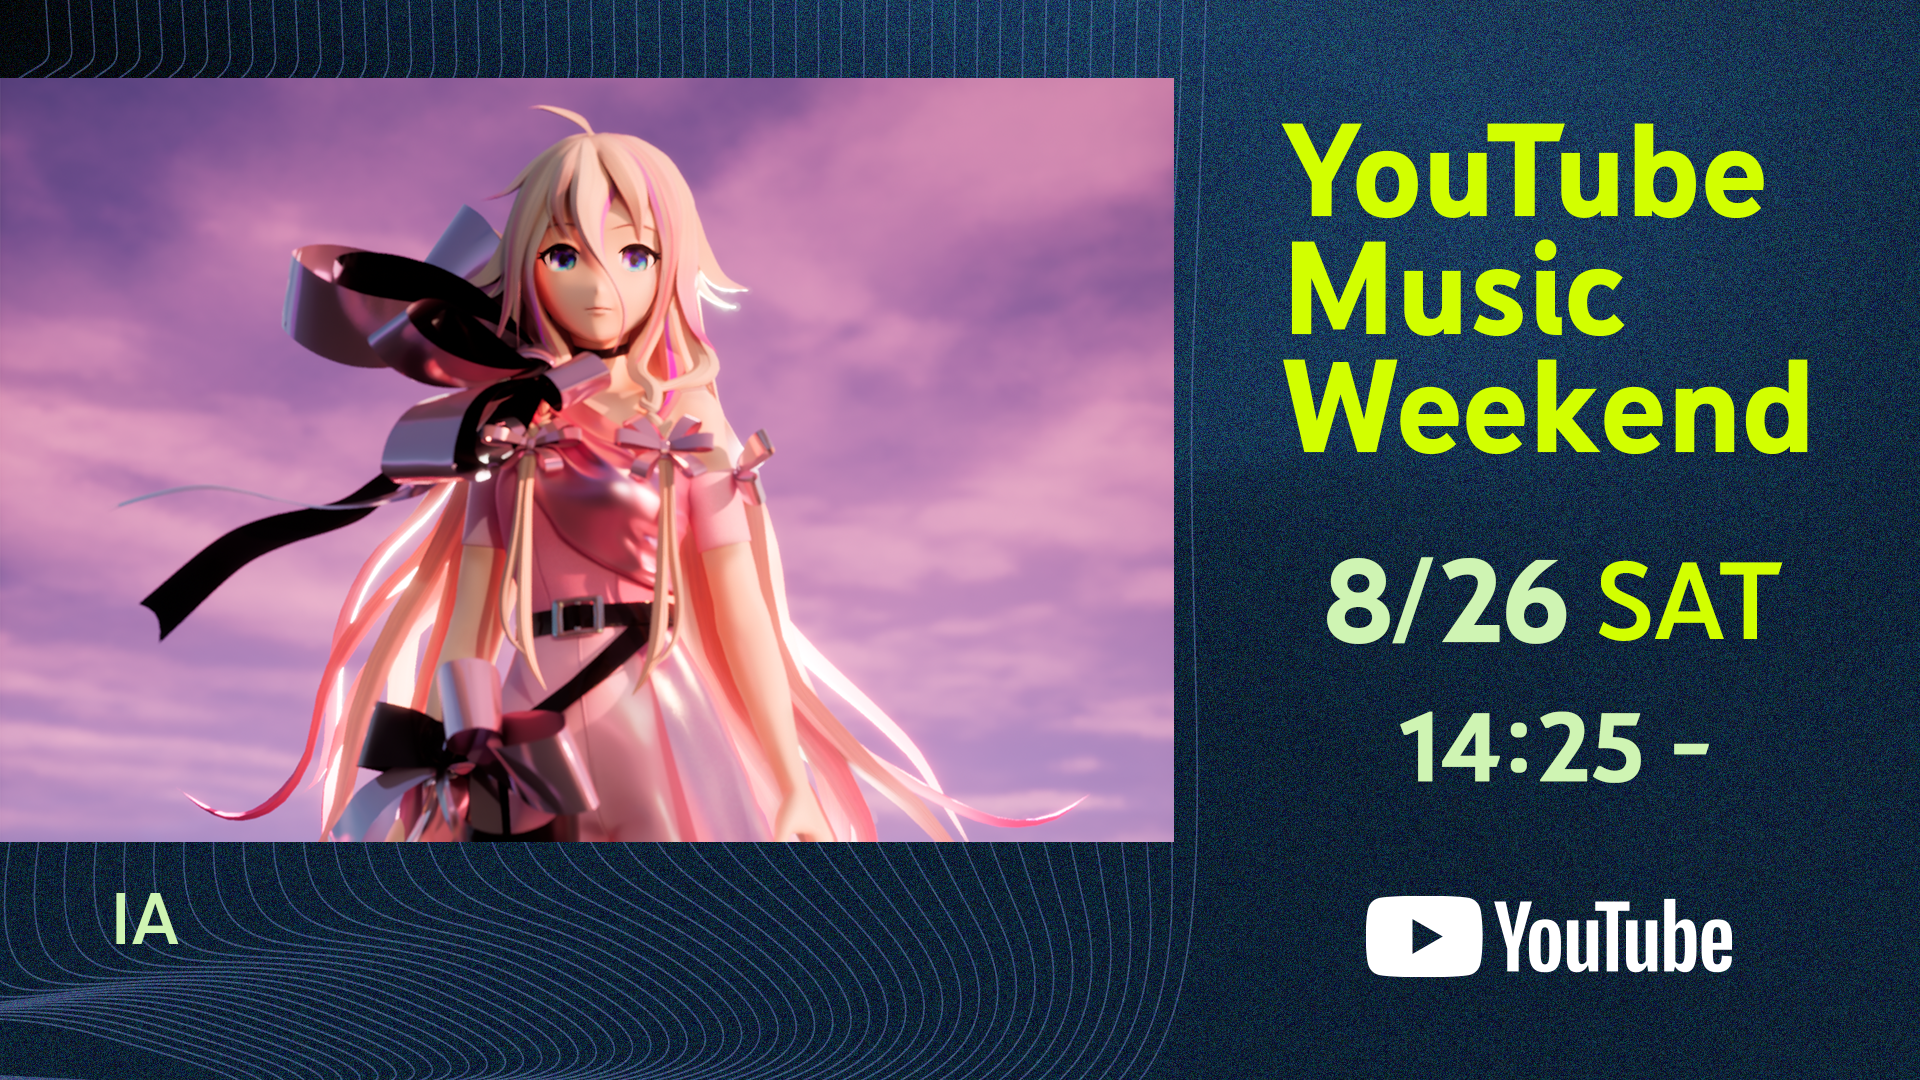 【LIVE・EVENT(配信) INFO】8/25(金)~27(日)開催「YouTube Music Weekend 7.0 supported by docomo」にIAの出演・参加が決定!!